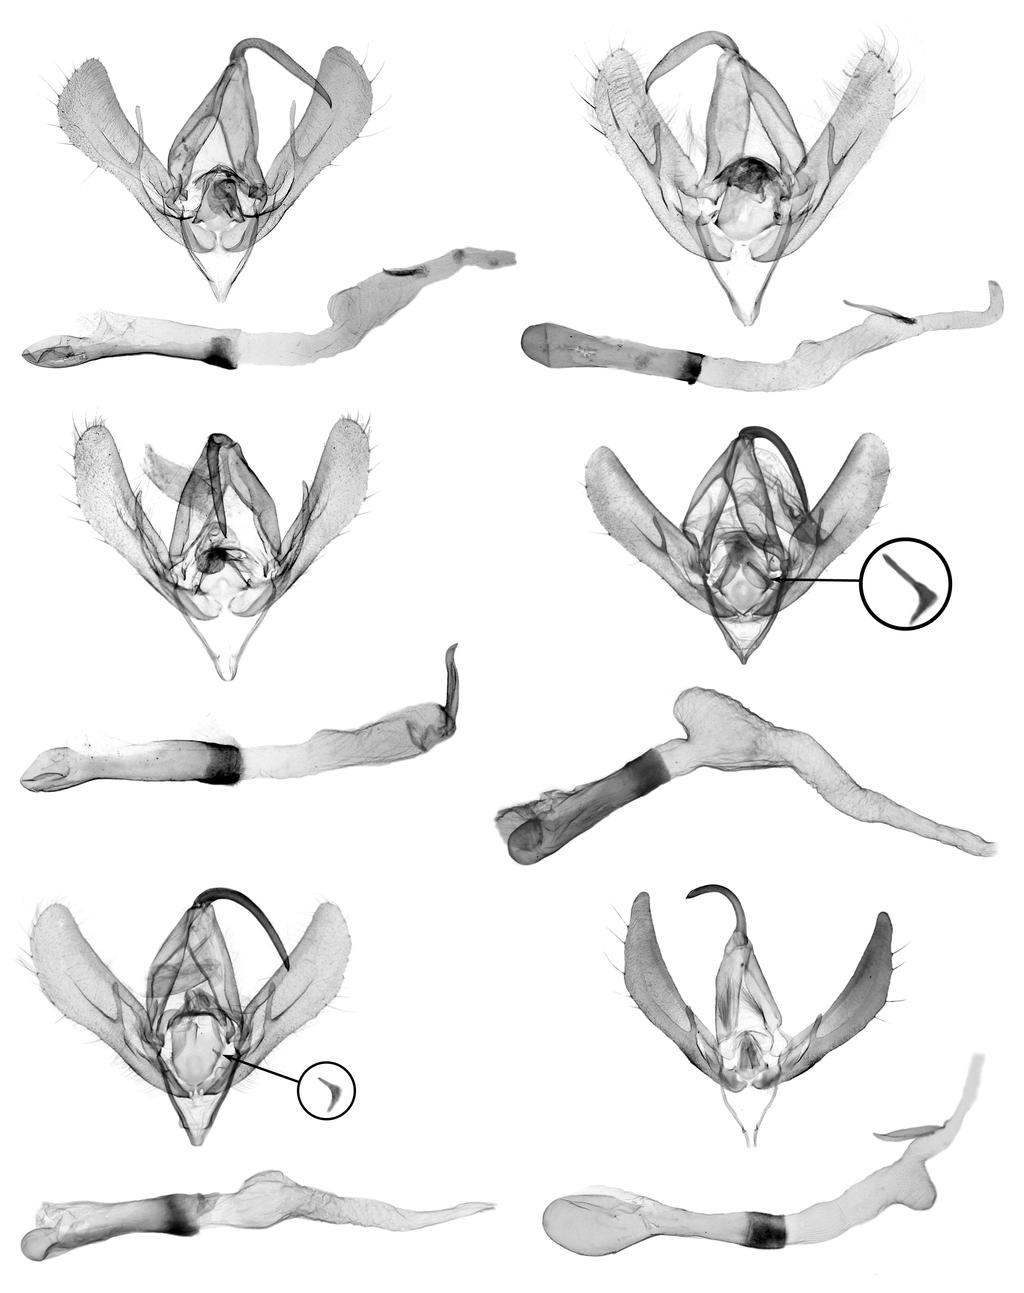 A REVIEW OF MEGALOGRAPHA LAFONTAINE AND POOLE 9 INSECTA MUNDI 0077, June 2009 5 10 11 12 13 14 Figure 9 14. Male genitalia of Megalographa spp. and Lophoplusia sp. 9) M.